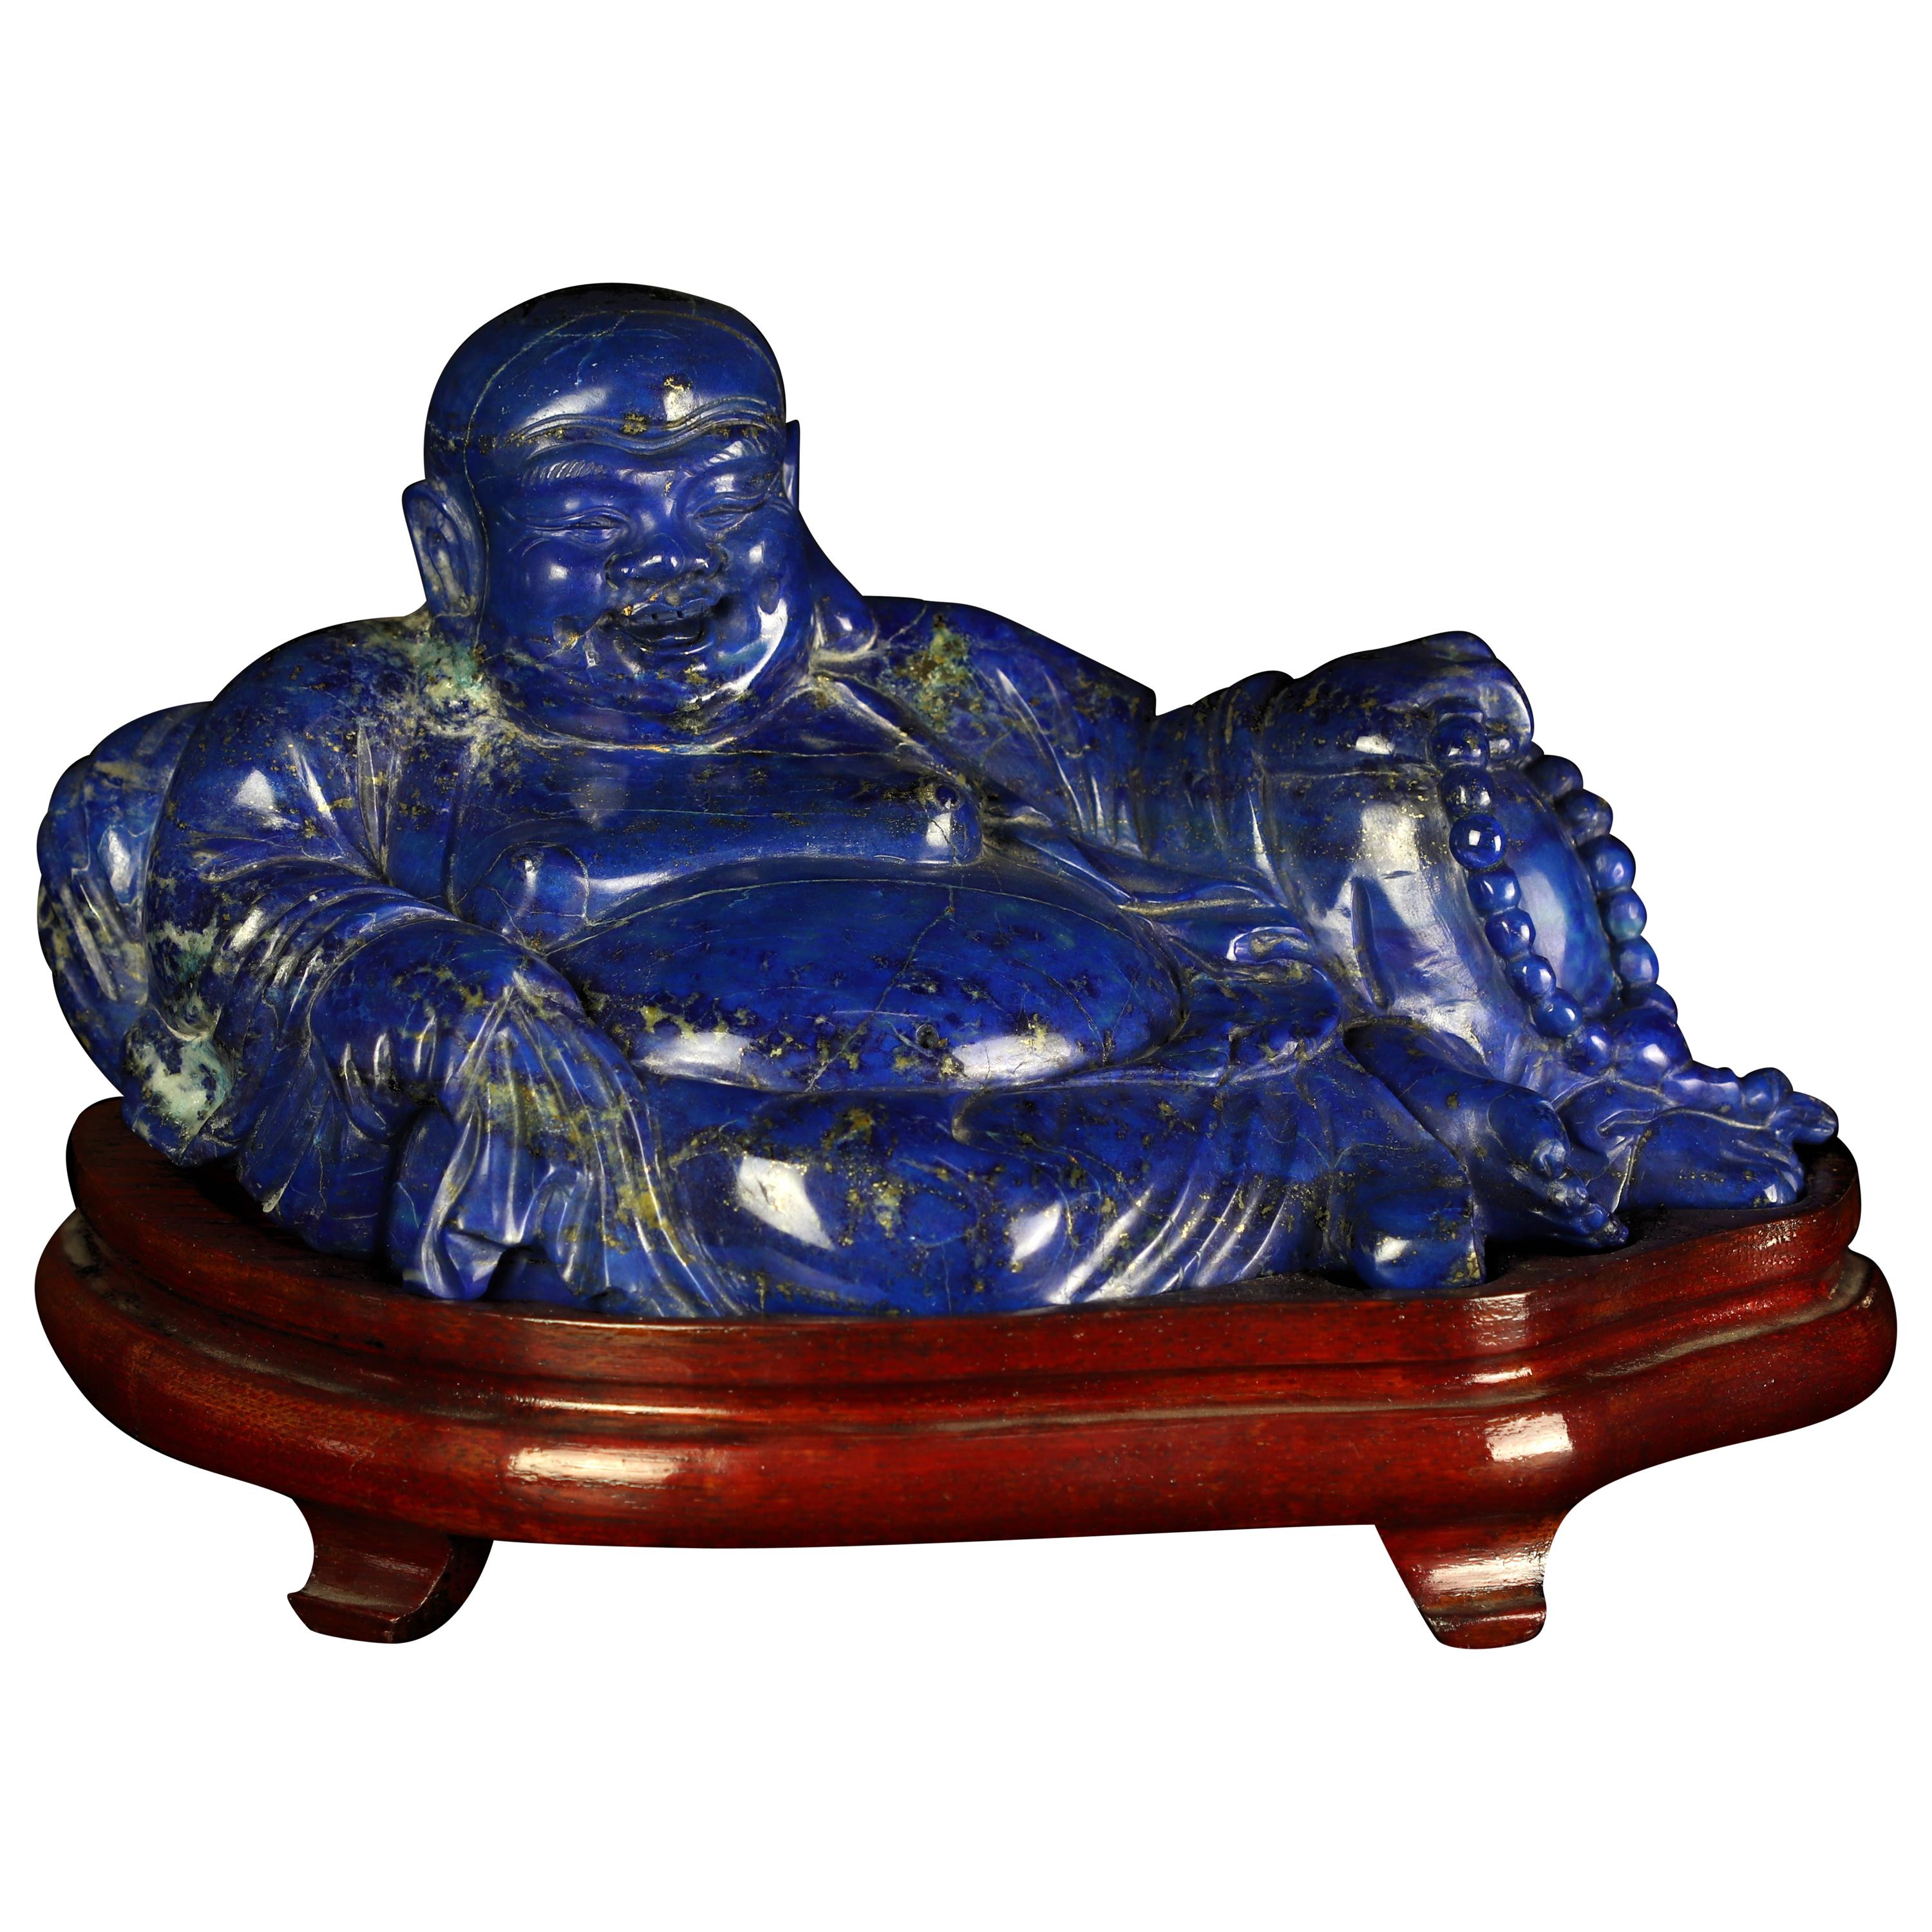 Lapis Lazuli Natural Laughing Buddha Carved Gemstone Asian Art Statue Sculpture For Sale